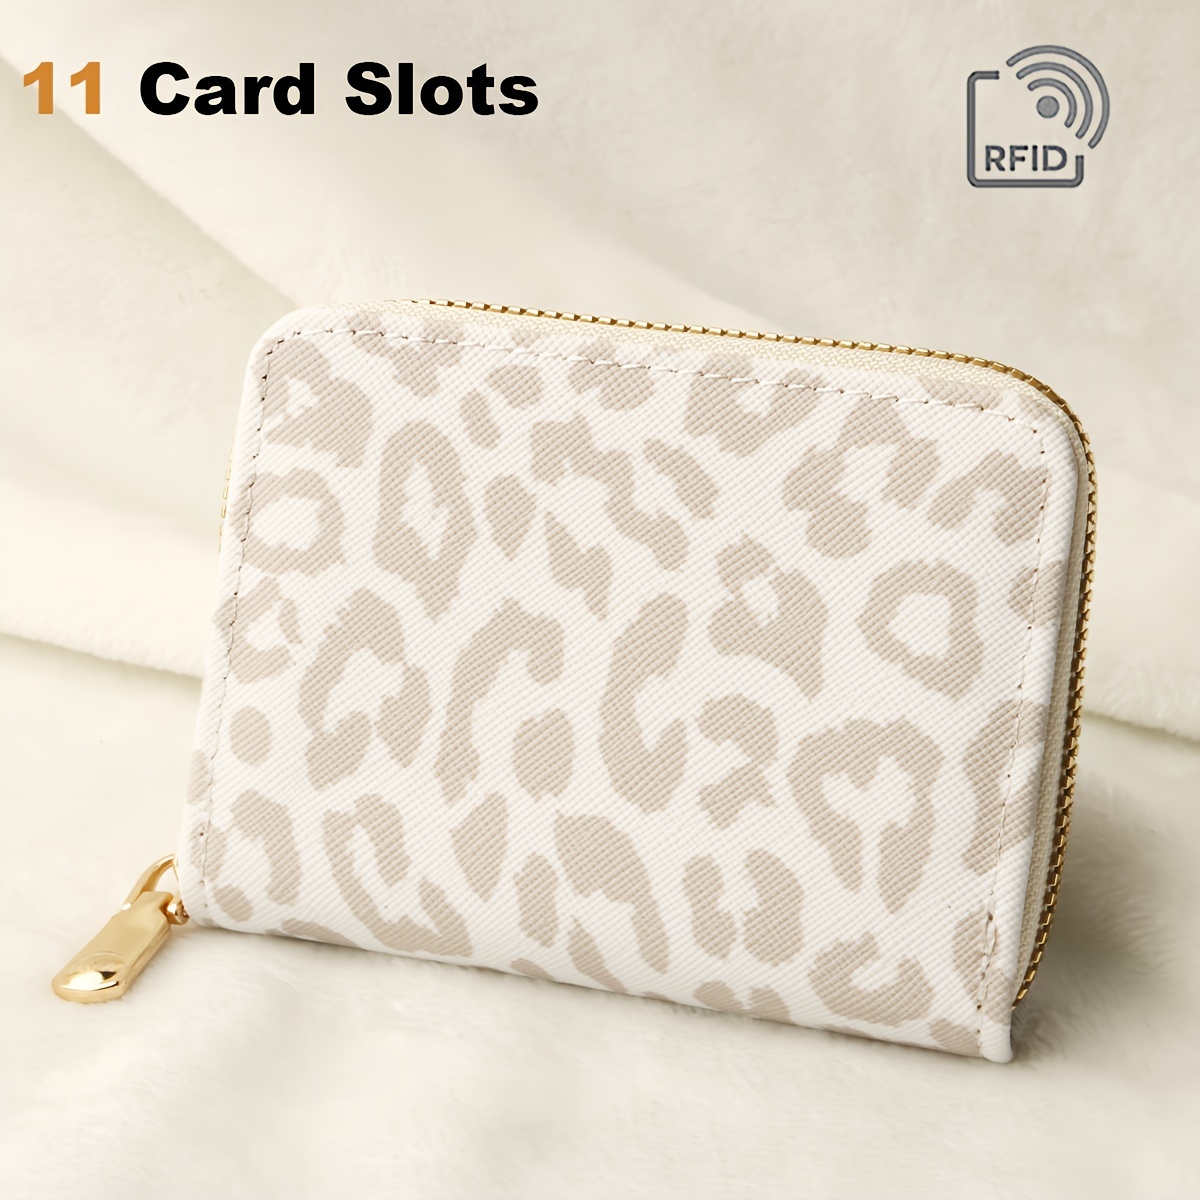 

Fashionable Leopard Print Mini Wallet With Rfid Blocking, Pu Material Purse With Zipper Closure And 11 Card Slots(4.3''x 3.1'')